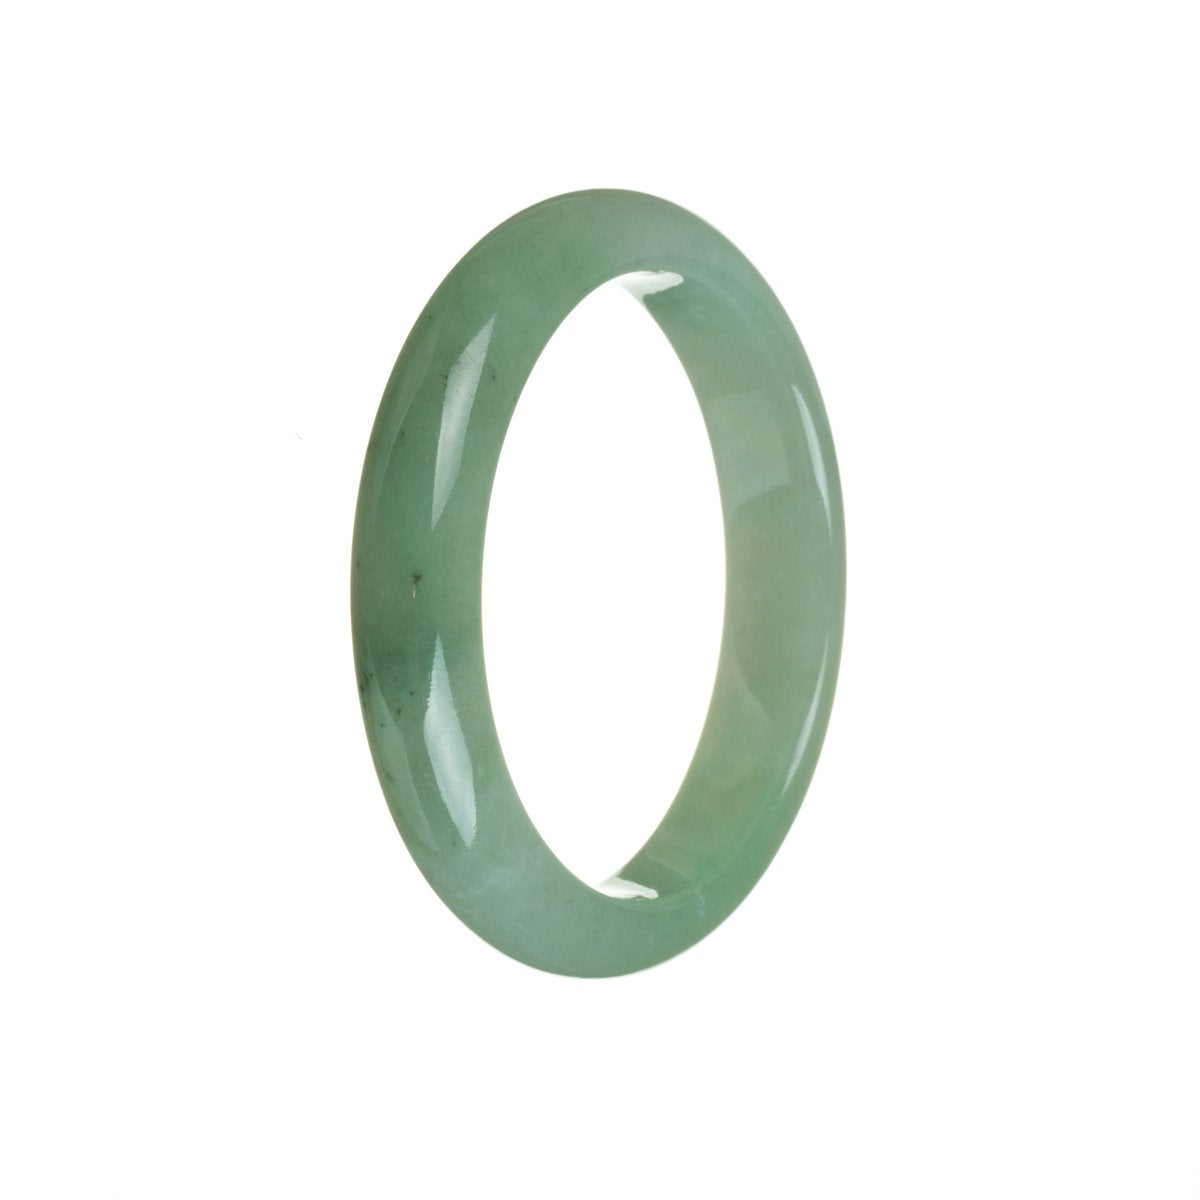 A beautiful half moon-shaped Grade A green jade bangle measuring 55mm in diameter, crafted from authentic jadeite jade.